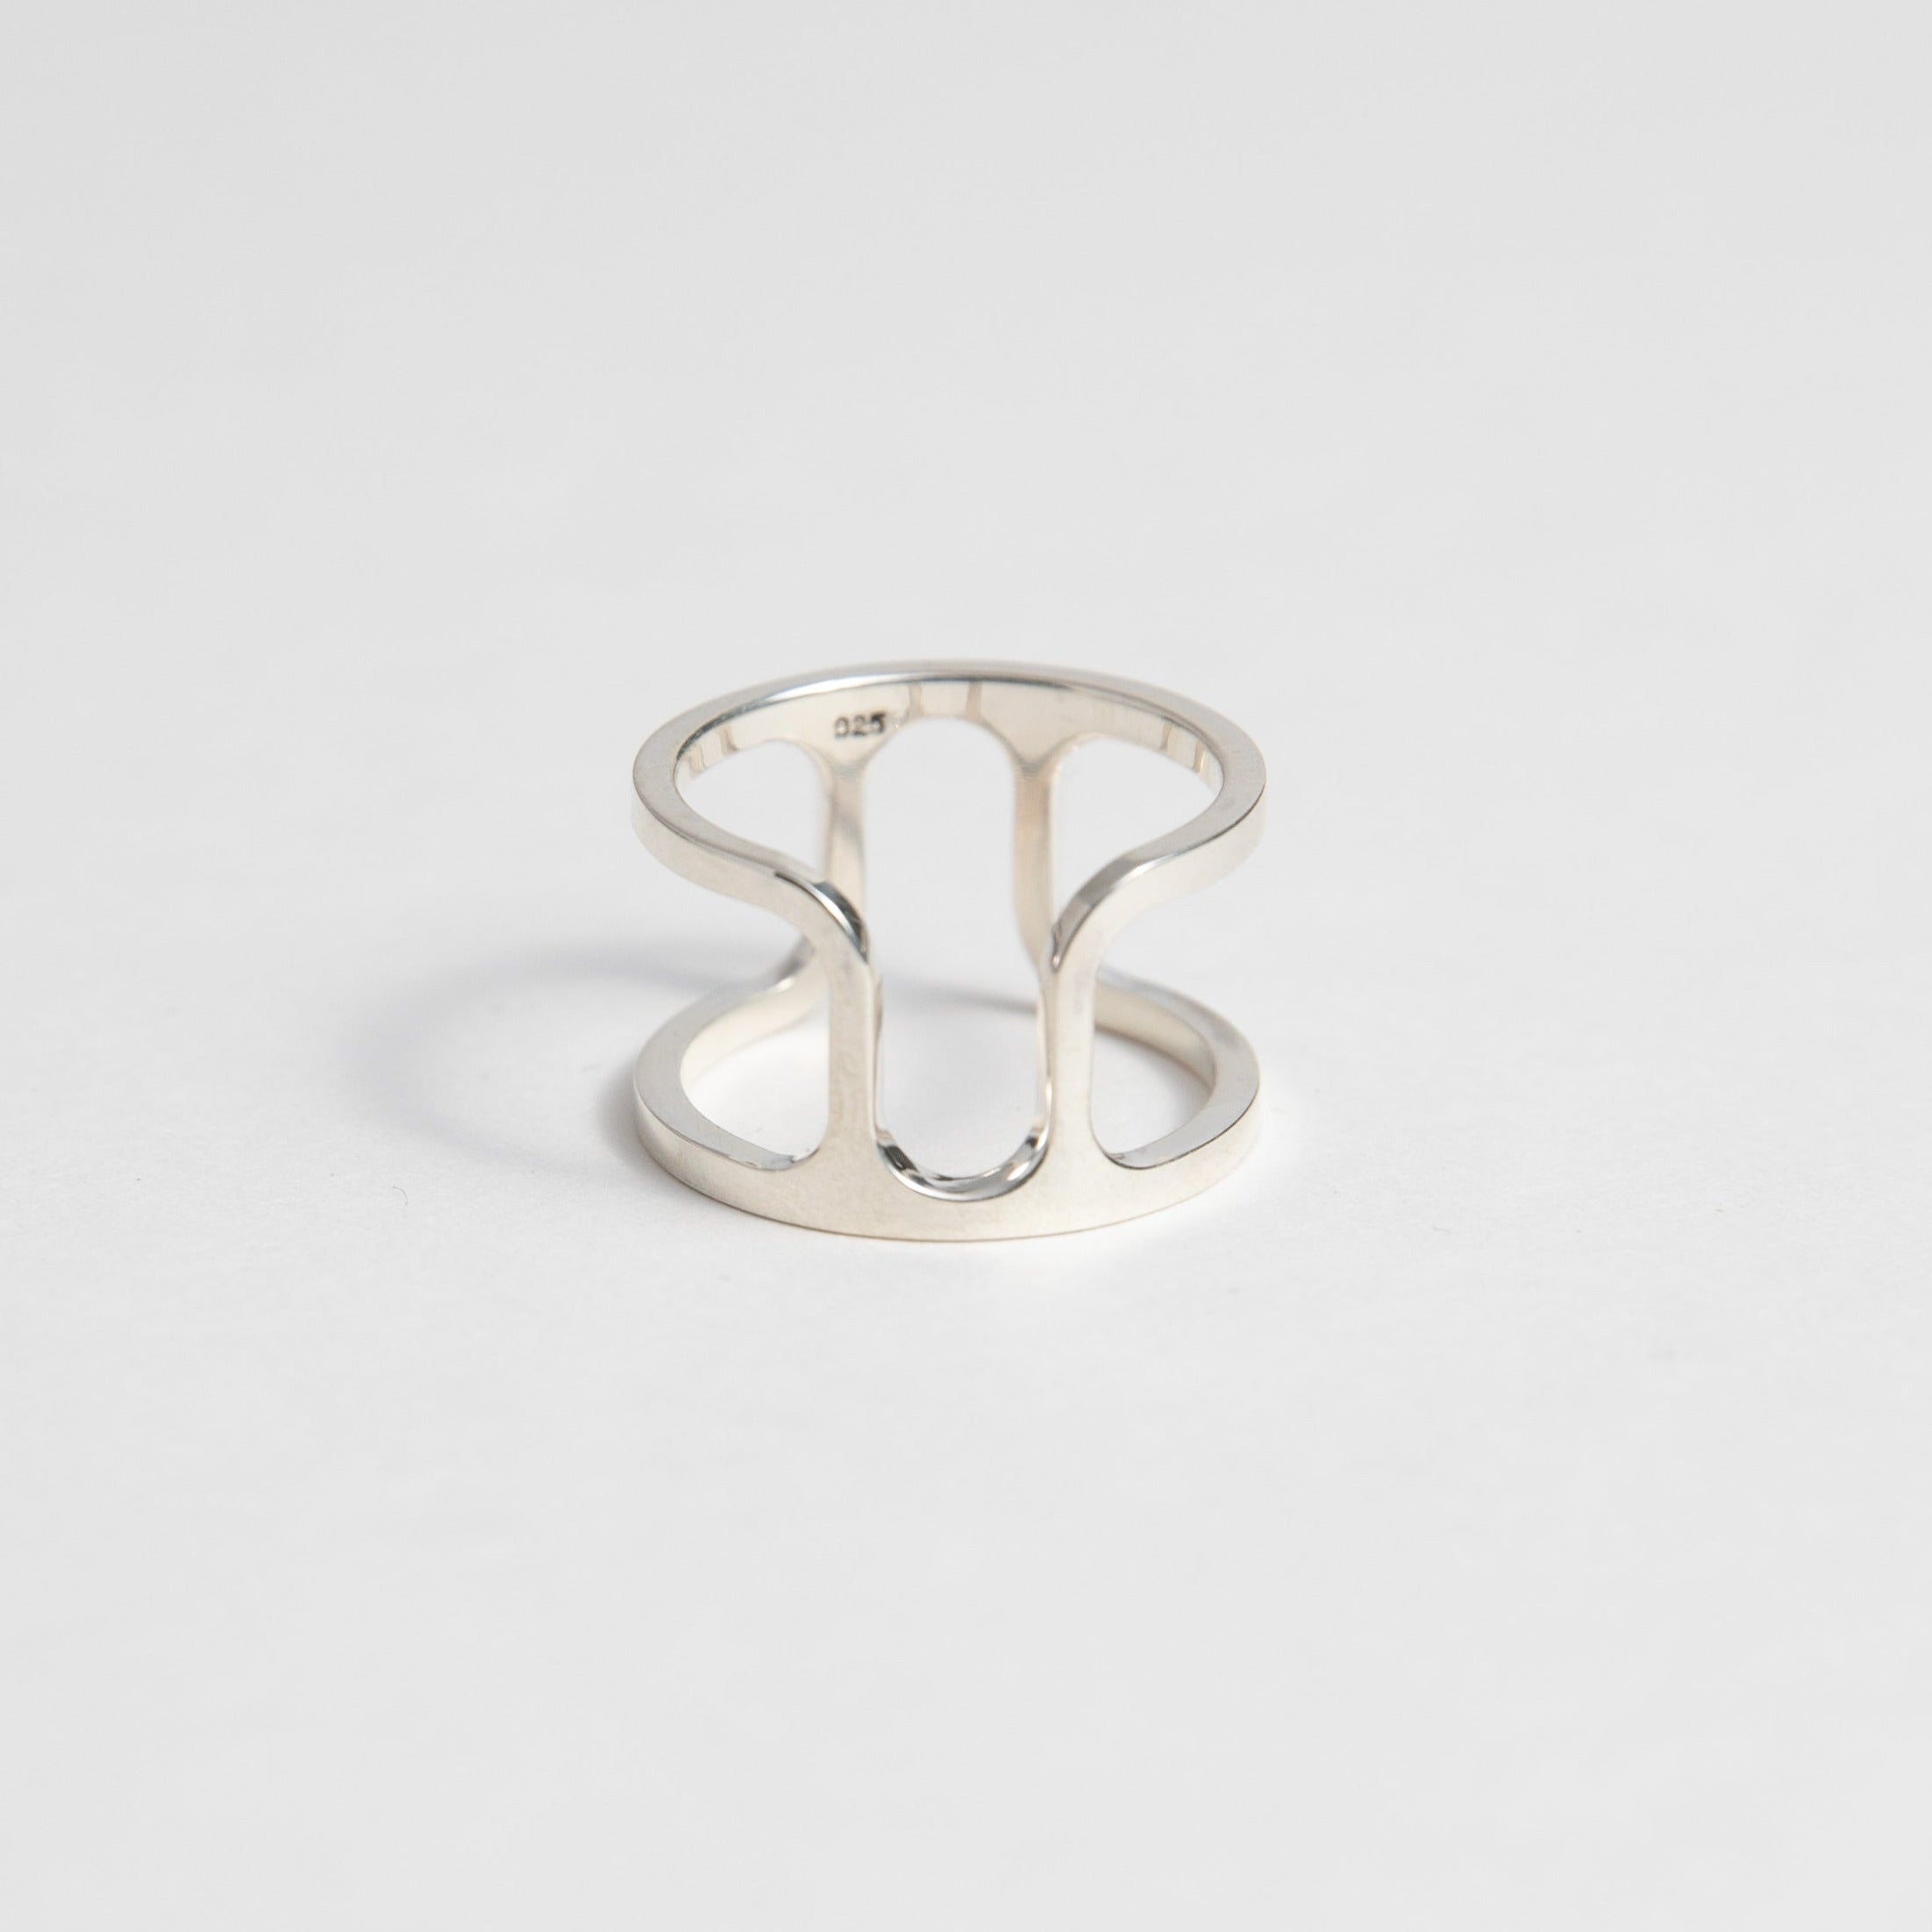 Coteri Handmade Ring in sterling silver by SHW Fine Jewelry in NYC